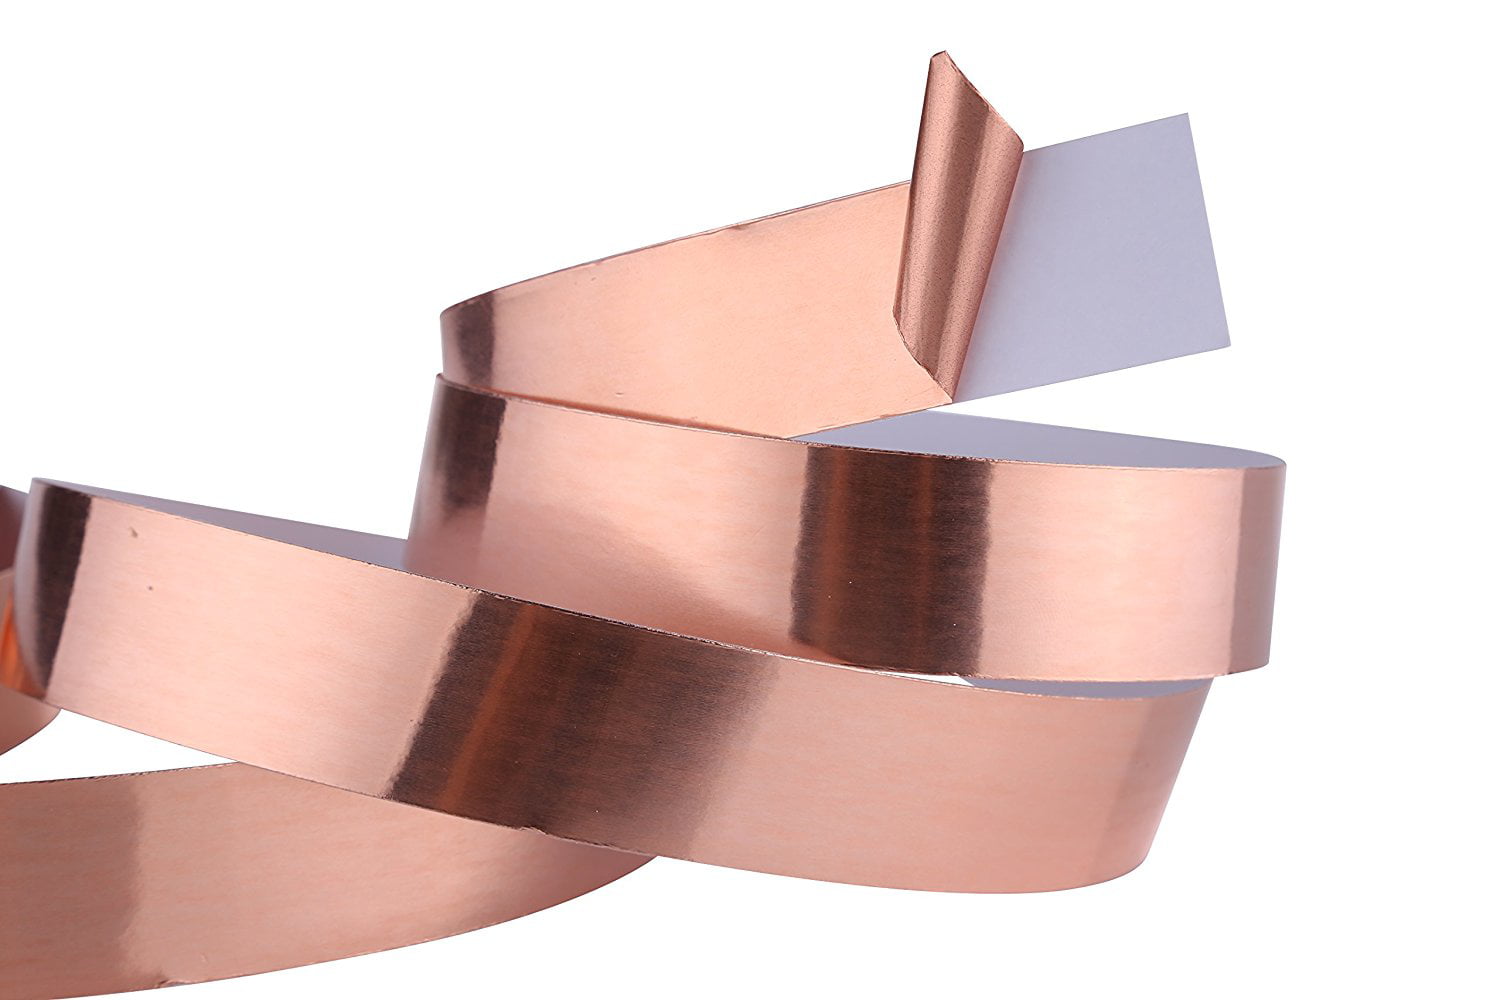 Qrity 1 Pcs Copper Foil Tape with Conductive Adhesive, 10mm*20m, Copper Foil Tape for EMI Shielding, Induction Cooker, Guitar, Electrical Repairs